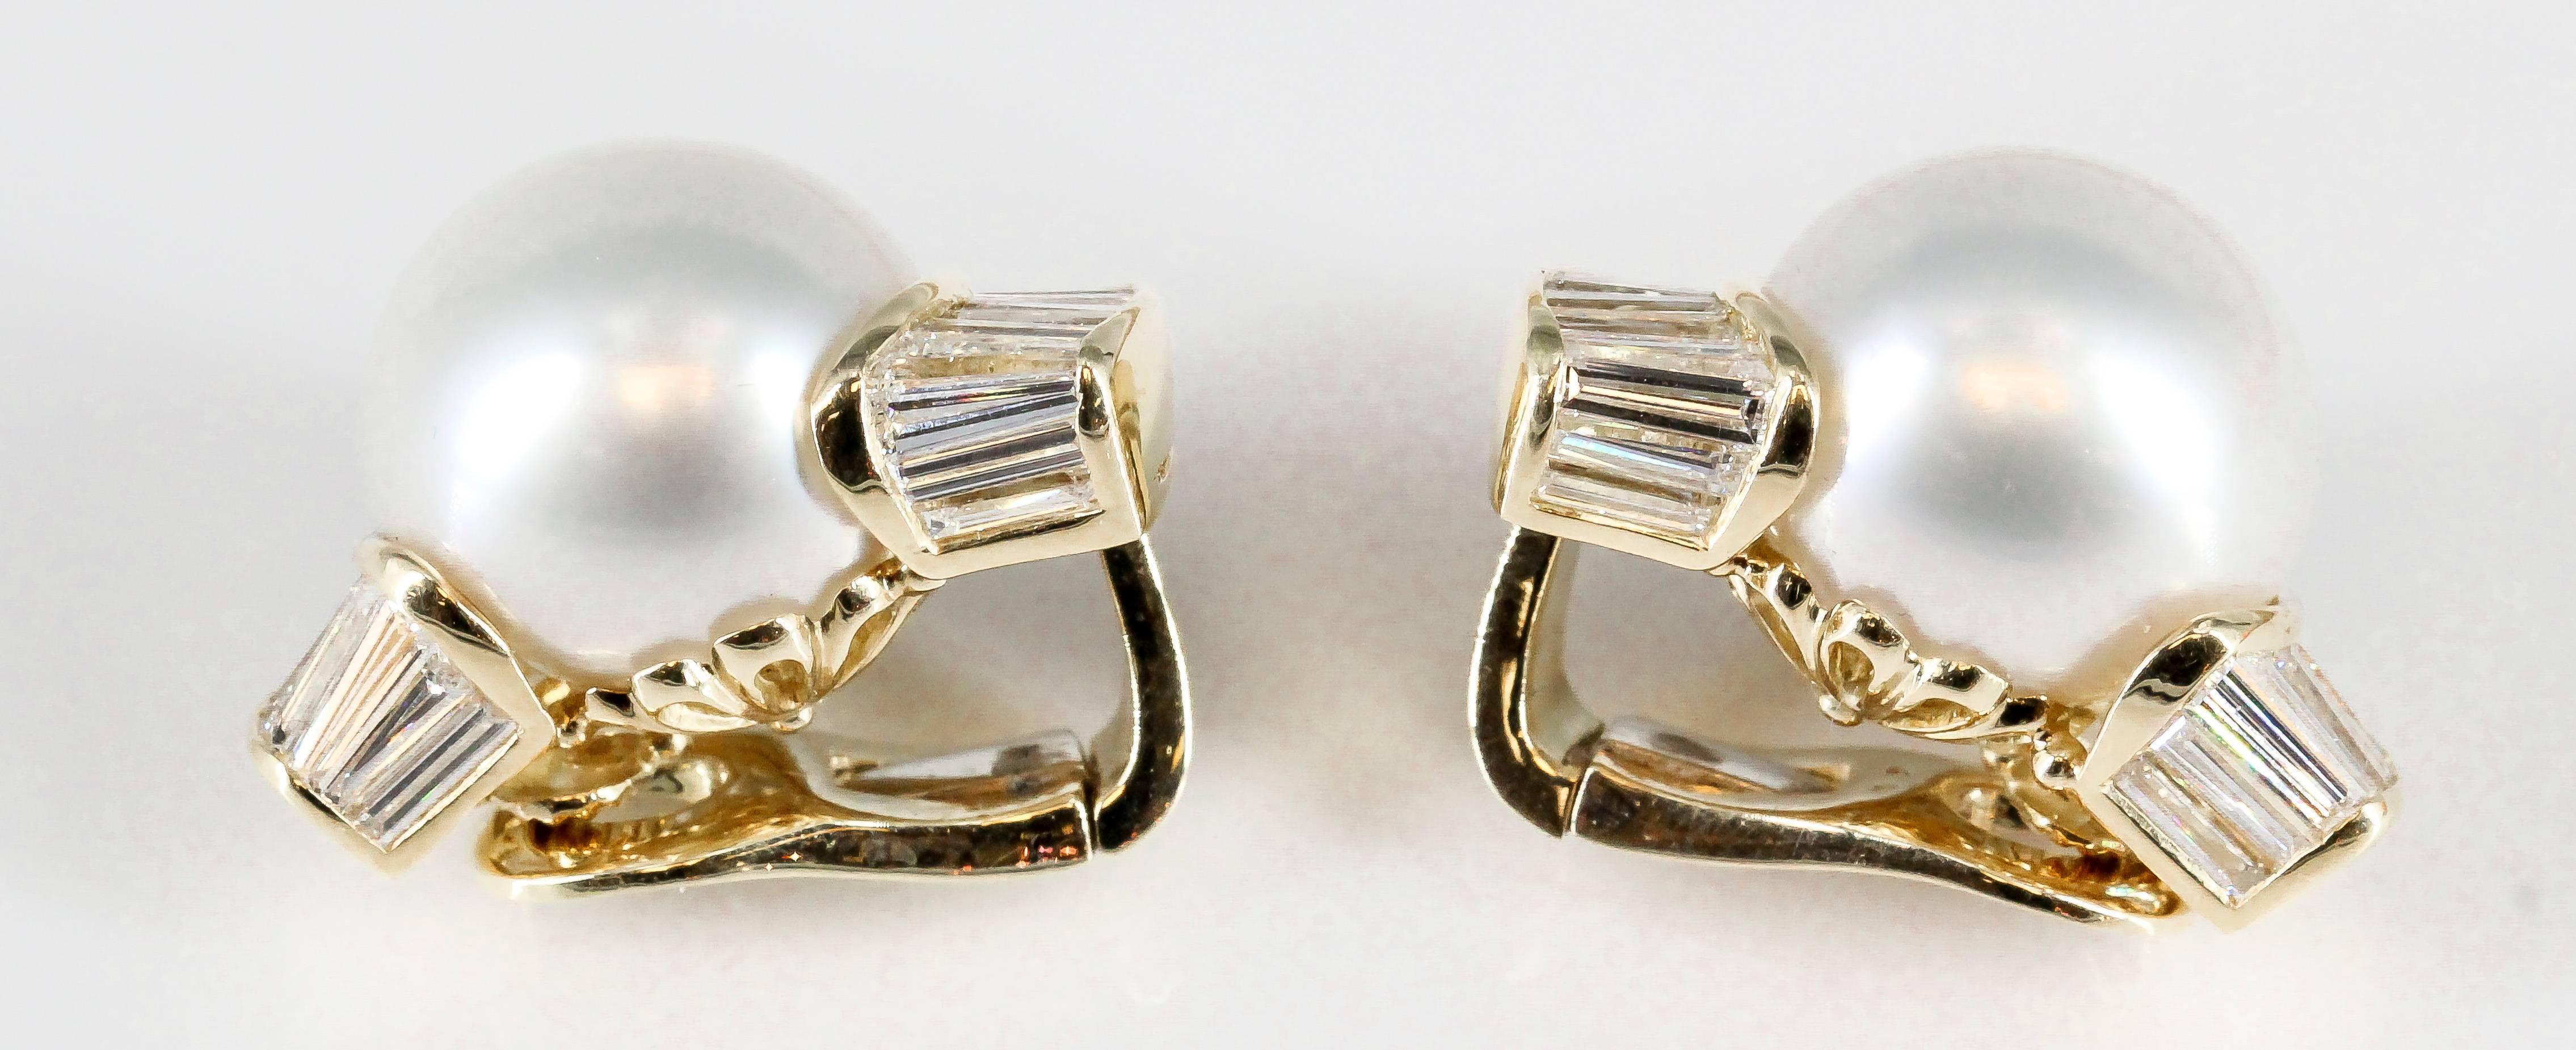 Timeless pearl, diamond and 18K yellow gold earrings by Bulgari. These wonderful earrings bear the "C" reference number given to special orders commissioned by Bulgari, thus making this pair most likely one of a kind. They feature